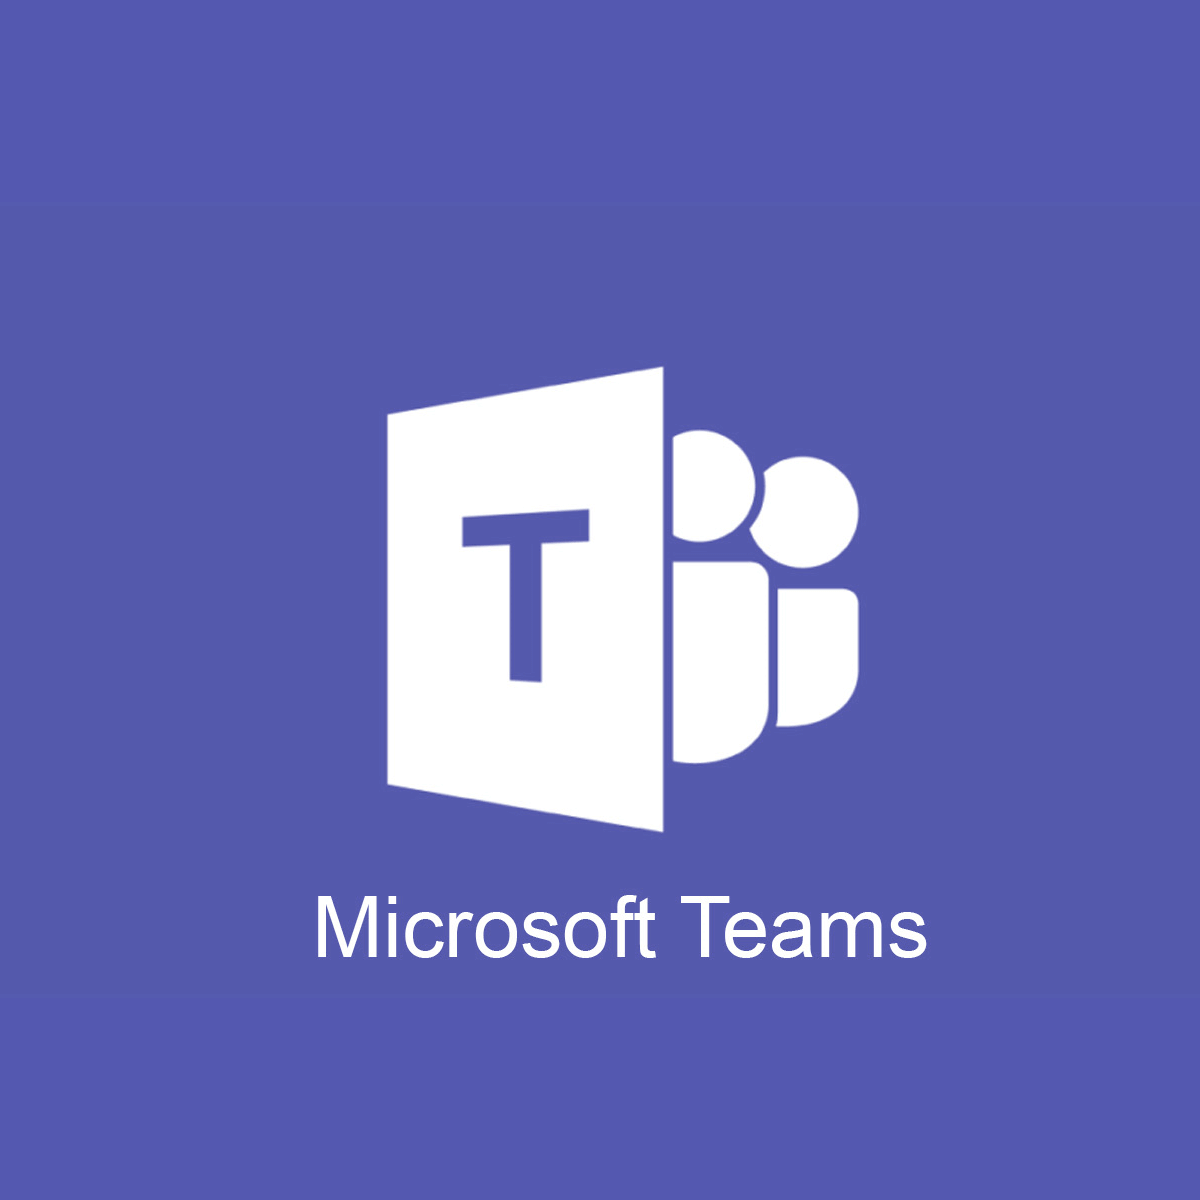 How to download meeting recordings in Microsoft Teams